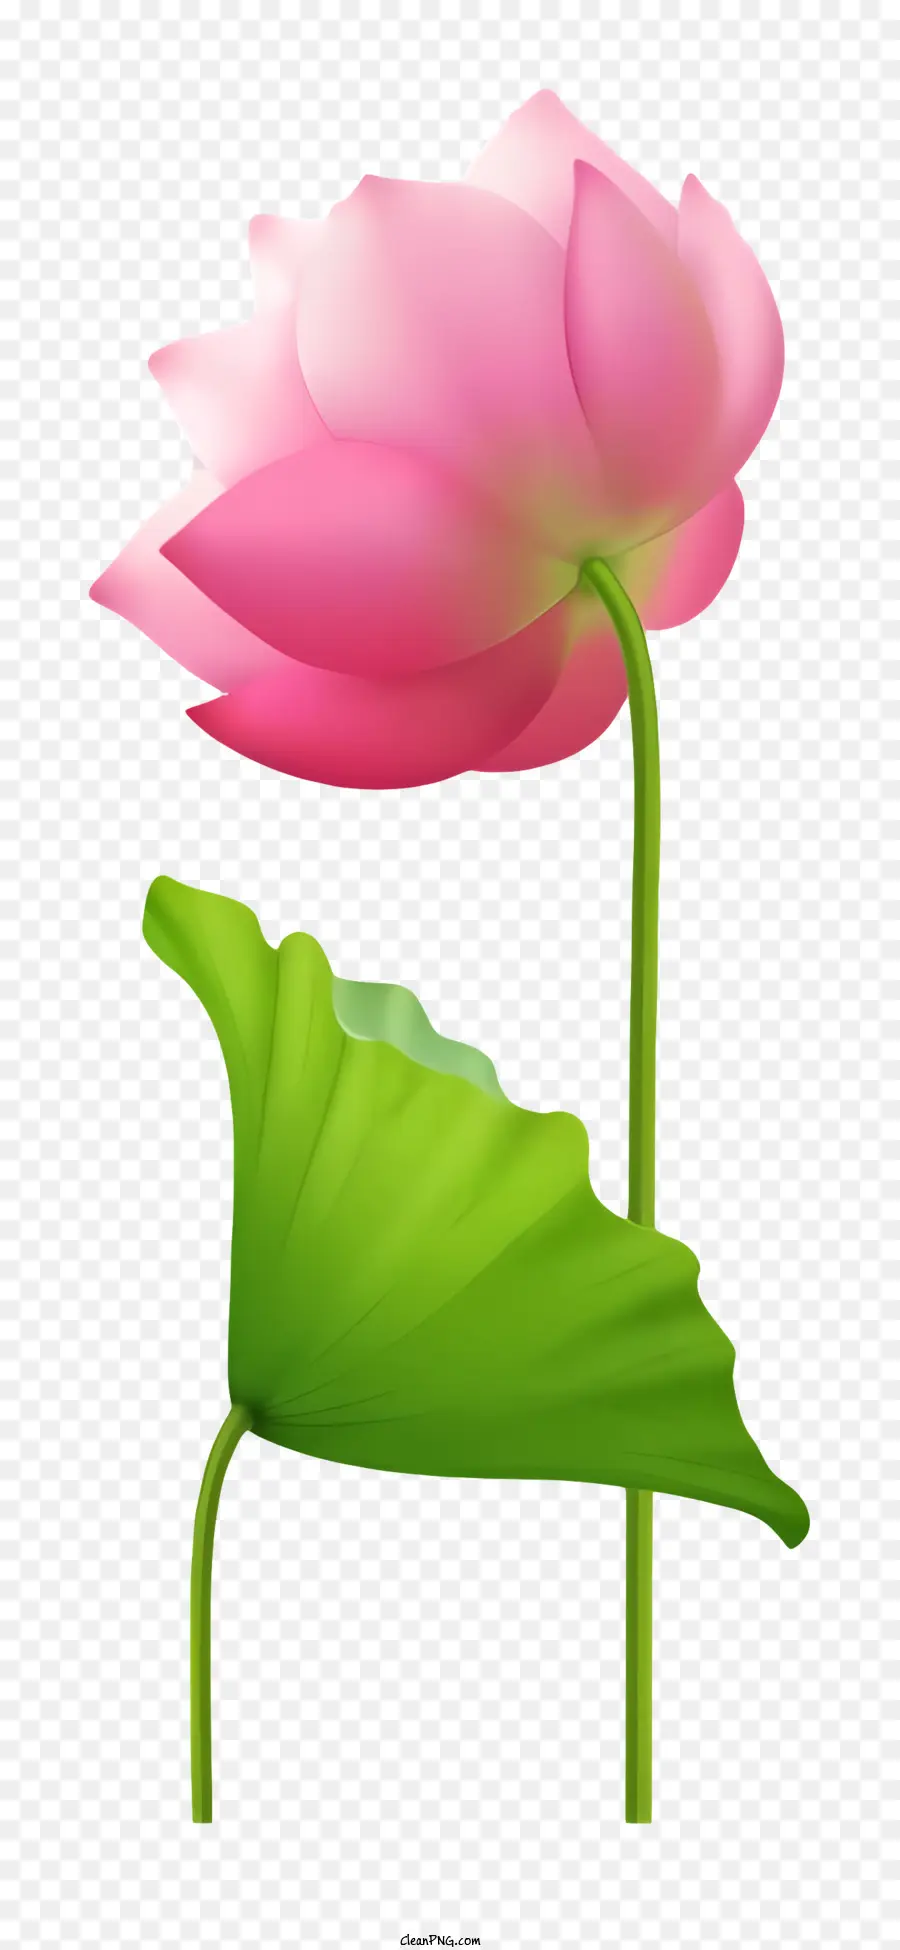 icon pink lotus flower black background green leaves spread open petals